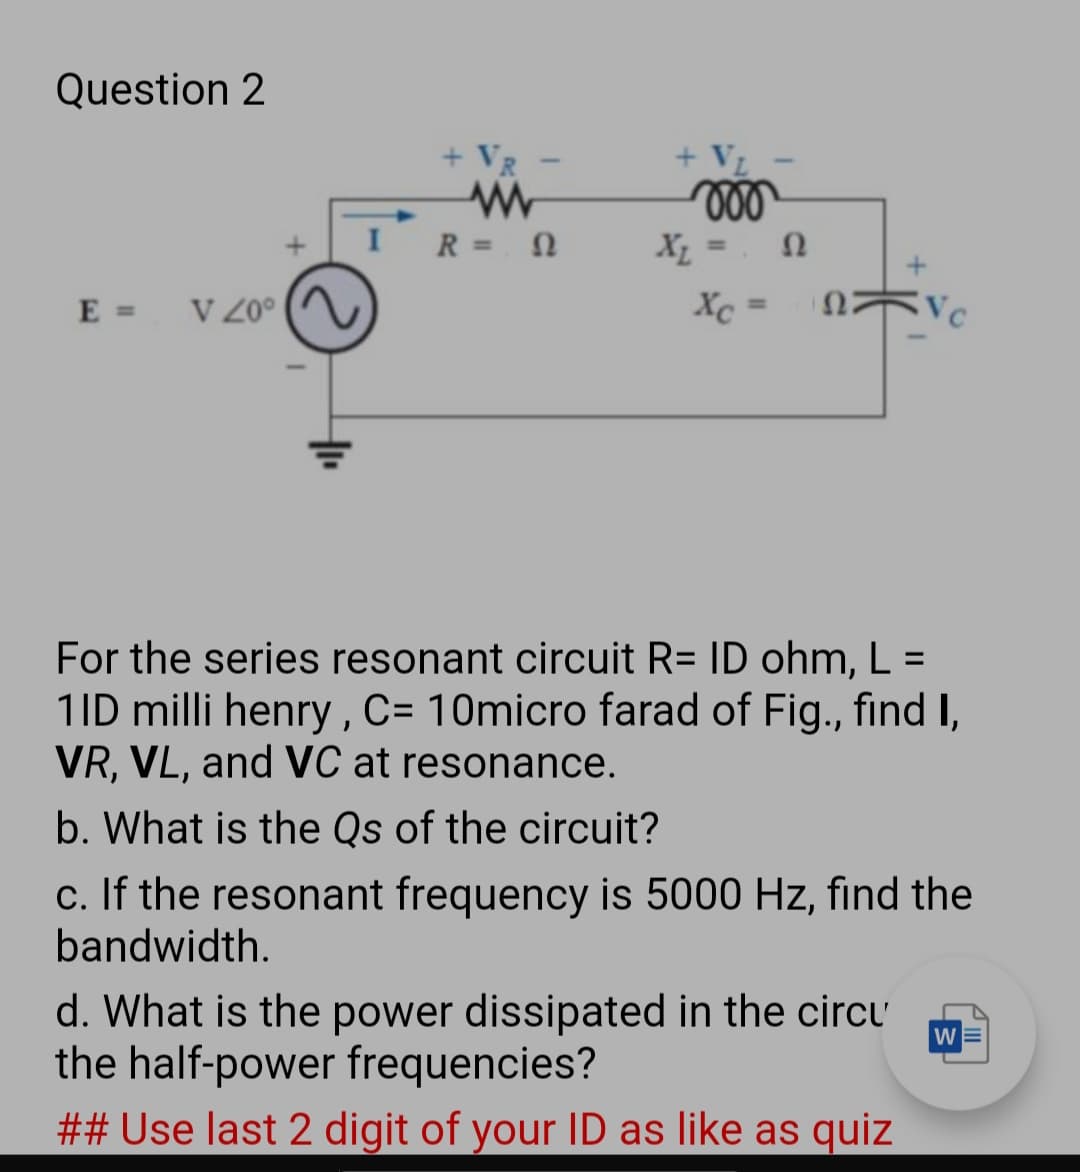 Question 2
+ VL
ll
+ VR
R =
%3D
%3D
E = VZ0°
Xc
VC
%3D
For the series resonant circuit R= ID ohm, L =
1ID milli henry , C= 10micro farad of Fig., find I,
VR, VL, and VC at resonance.
%3D
b. What is the Qs of the circuit?
c. If the resonant frequency is 5000 Hz, find the
bandwidth.
d. What is the power dissipated in the circu
the half-power frequencies?
## Use last 2 digit of your ID as like as quiz
WE
